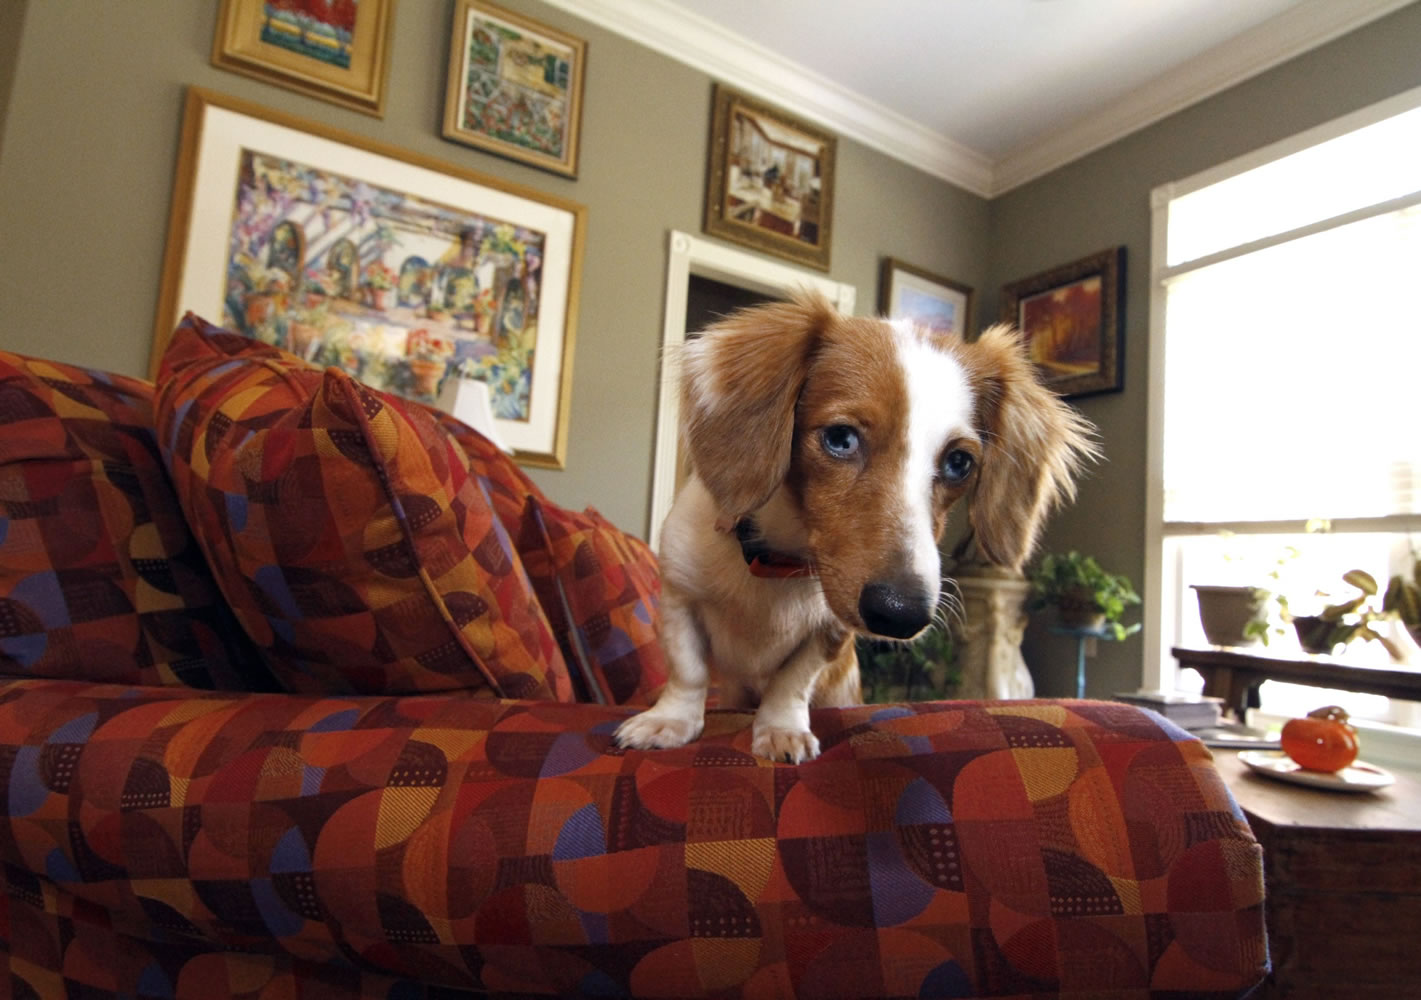 Harold Corbin's dog Macey, above, sits on a couch surrounded by some of Corbin's art collection in his Madison, Miss., home. Corbin developed an interest in art while in college.